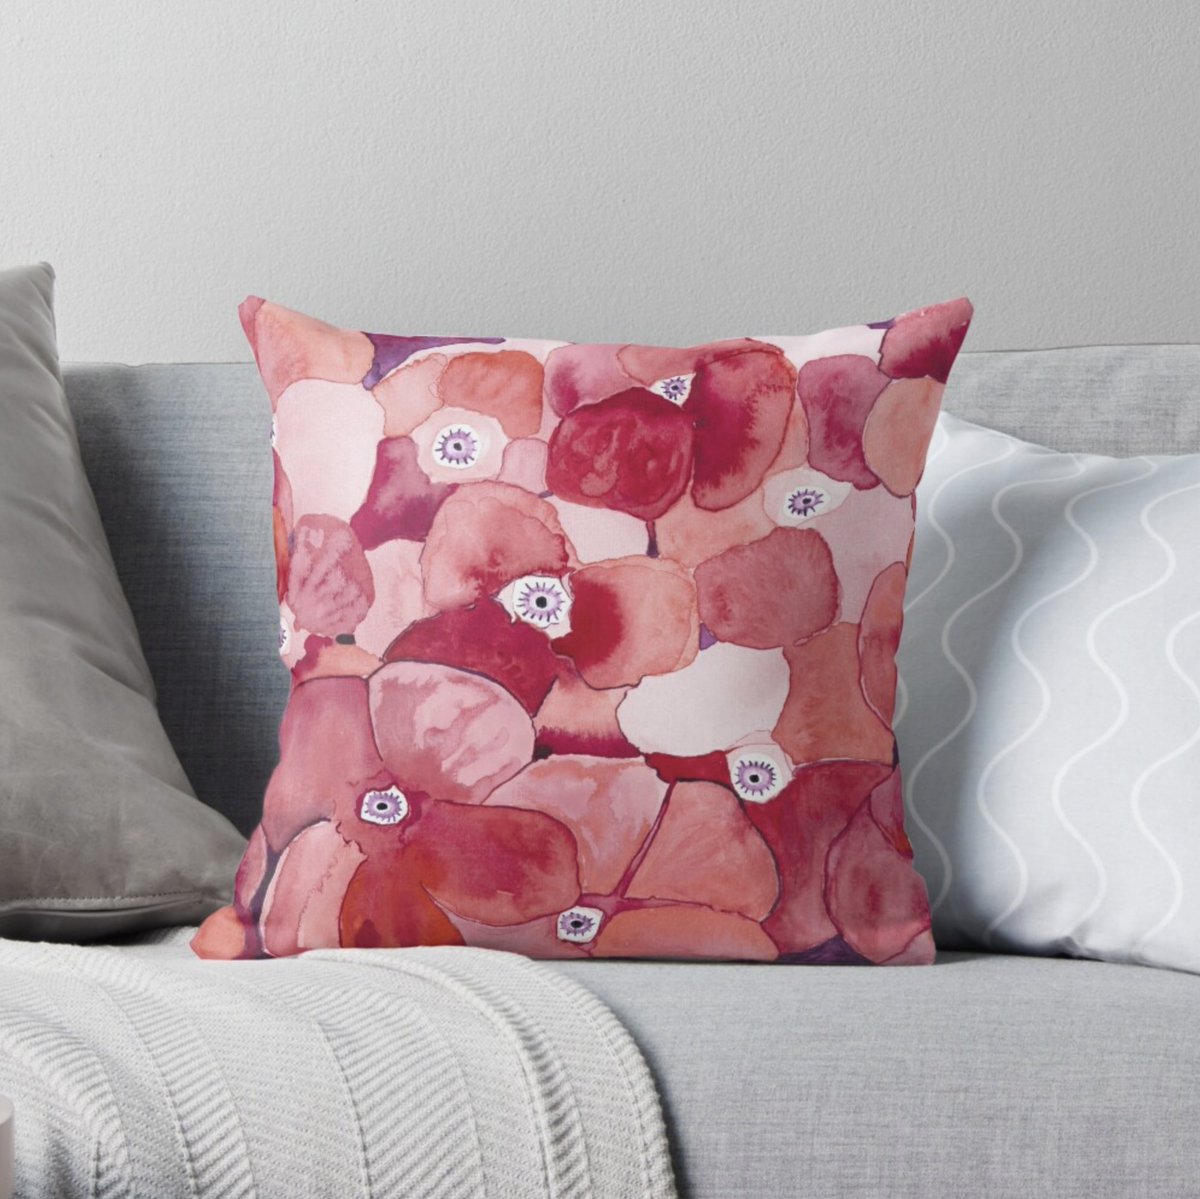 'Blood Roses' design in my #Redbubble shop tinyurl.com/ees3r7mw 🌹🌹🌹🌹🌹#GiftIdeas #Floral #Flowers #Roses #Red #Decor #Tees #WallArt #Stationery #Watercolor #Watercolour #Cushions #DrinkCoasters #Dining #LivingRoom #Home